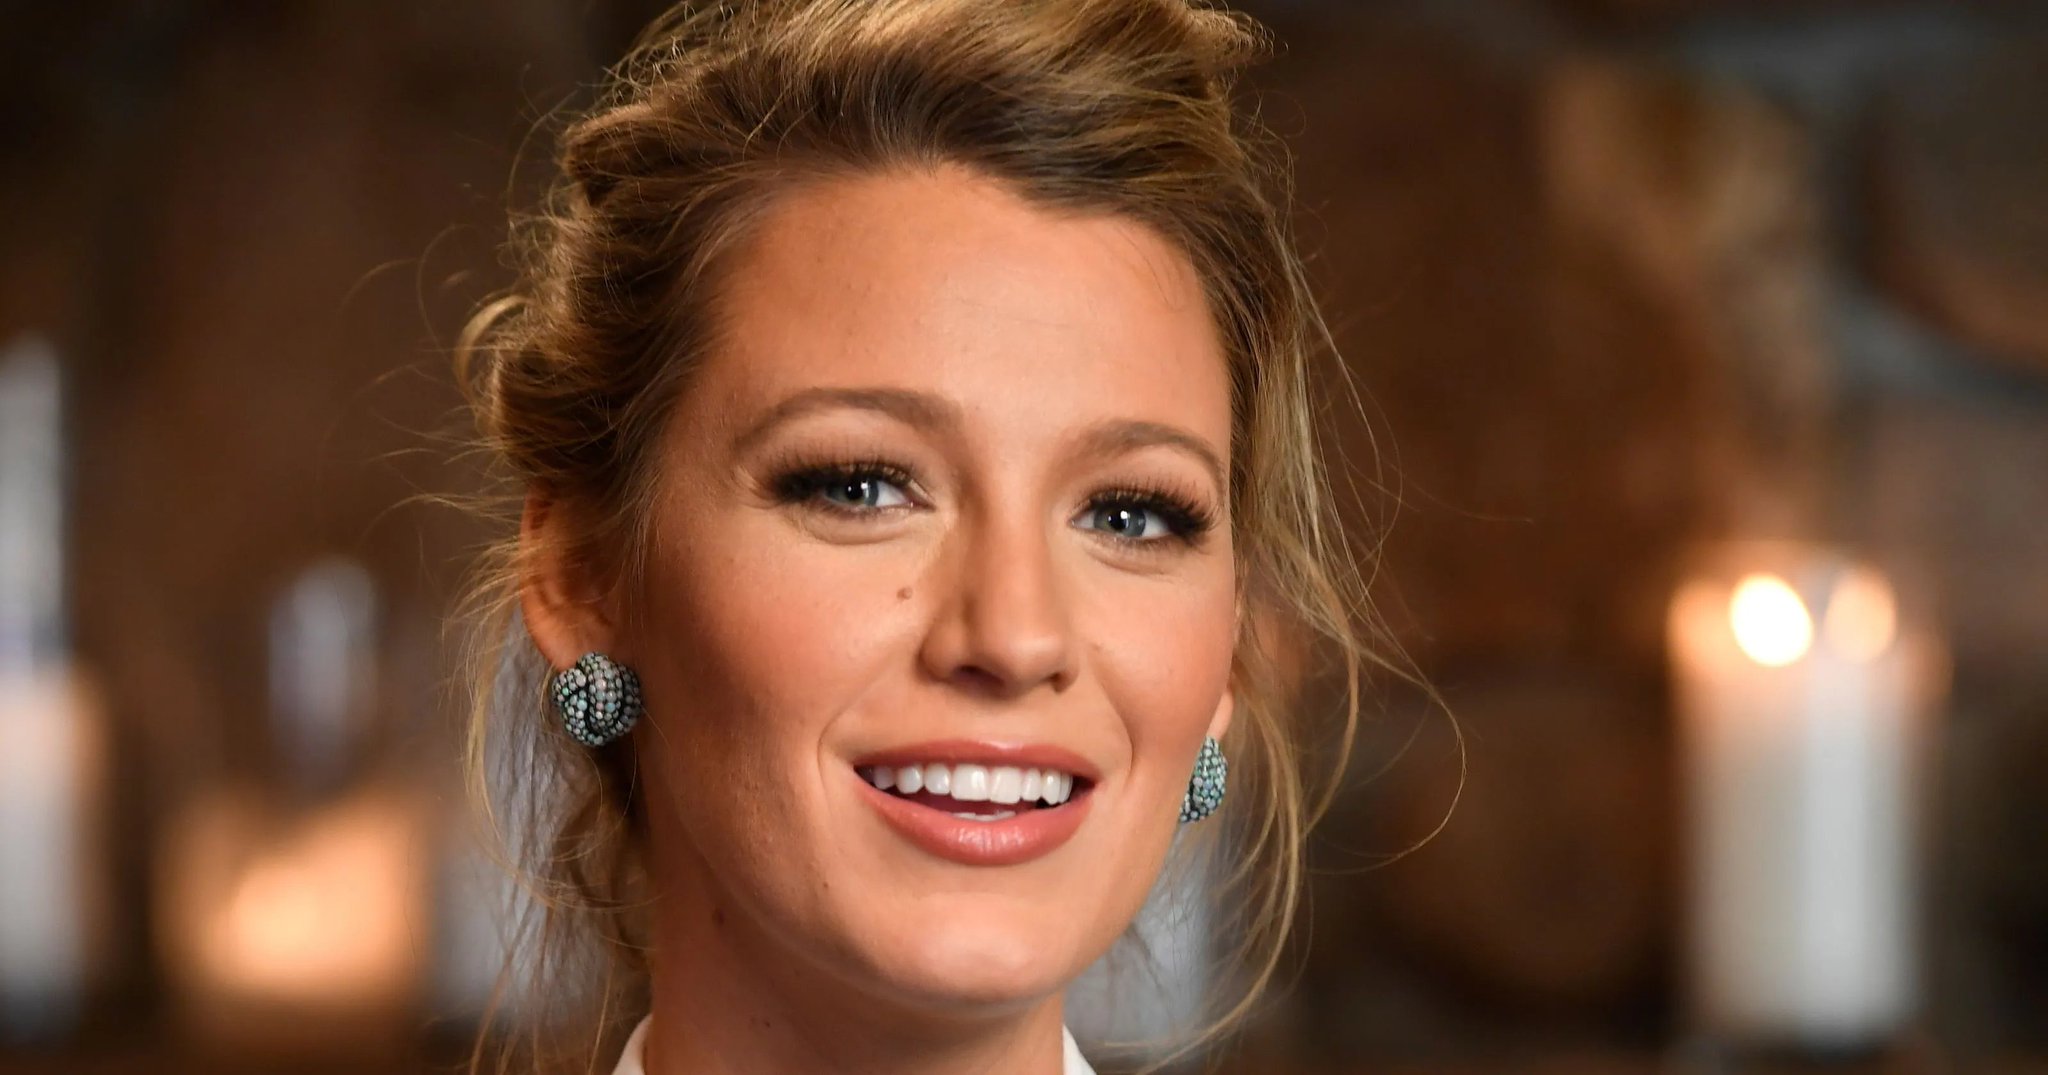 25 August 2020
Happy birthday to American actress Blake Lively 33 years old. 